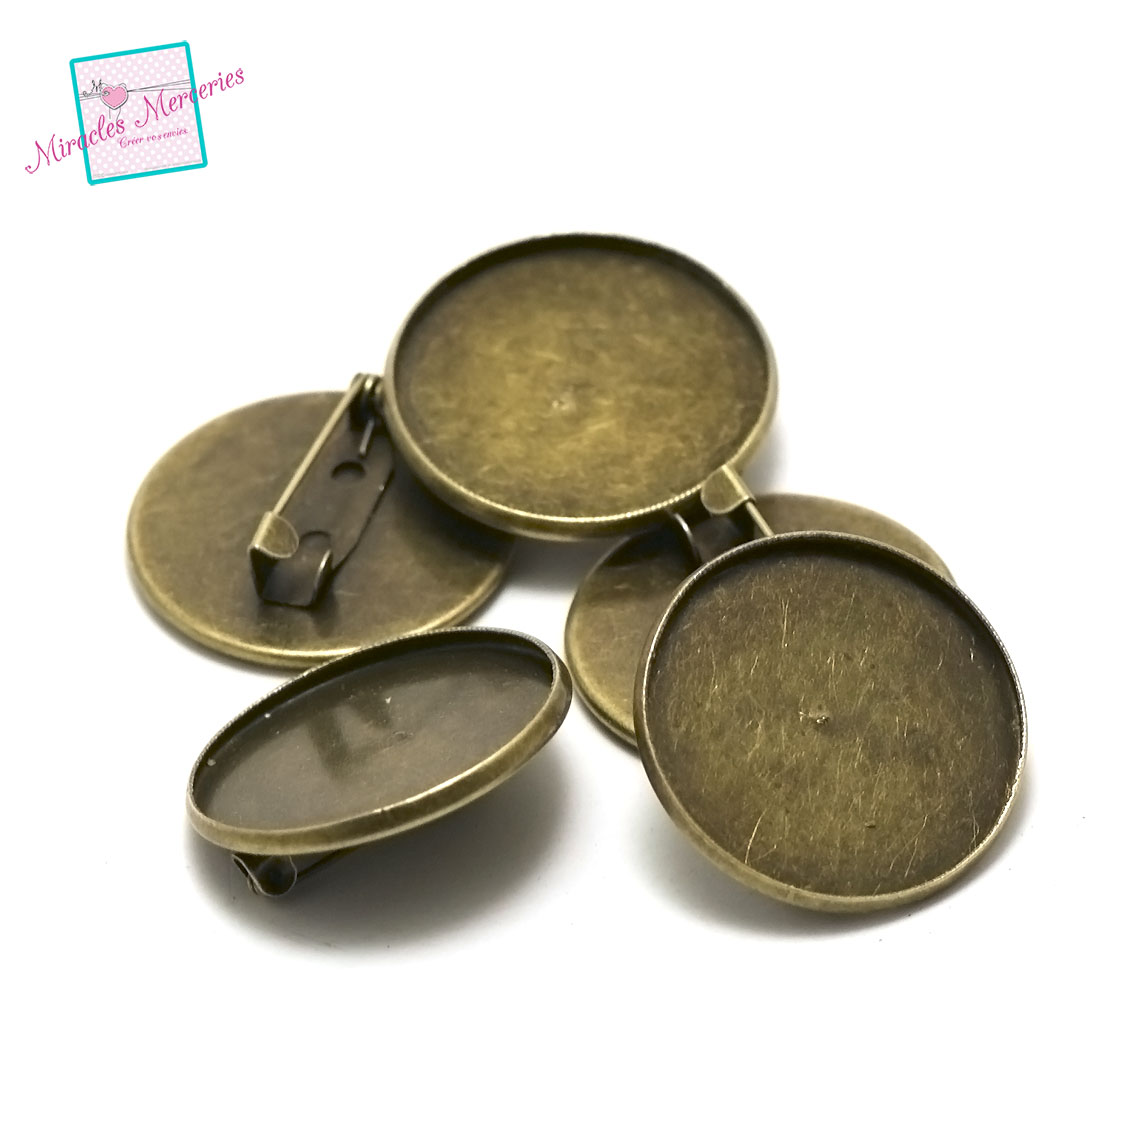 4 broches support cabochon ronde 25 mm,bronze